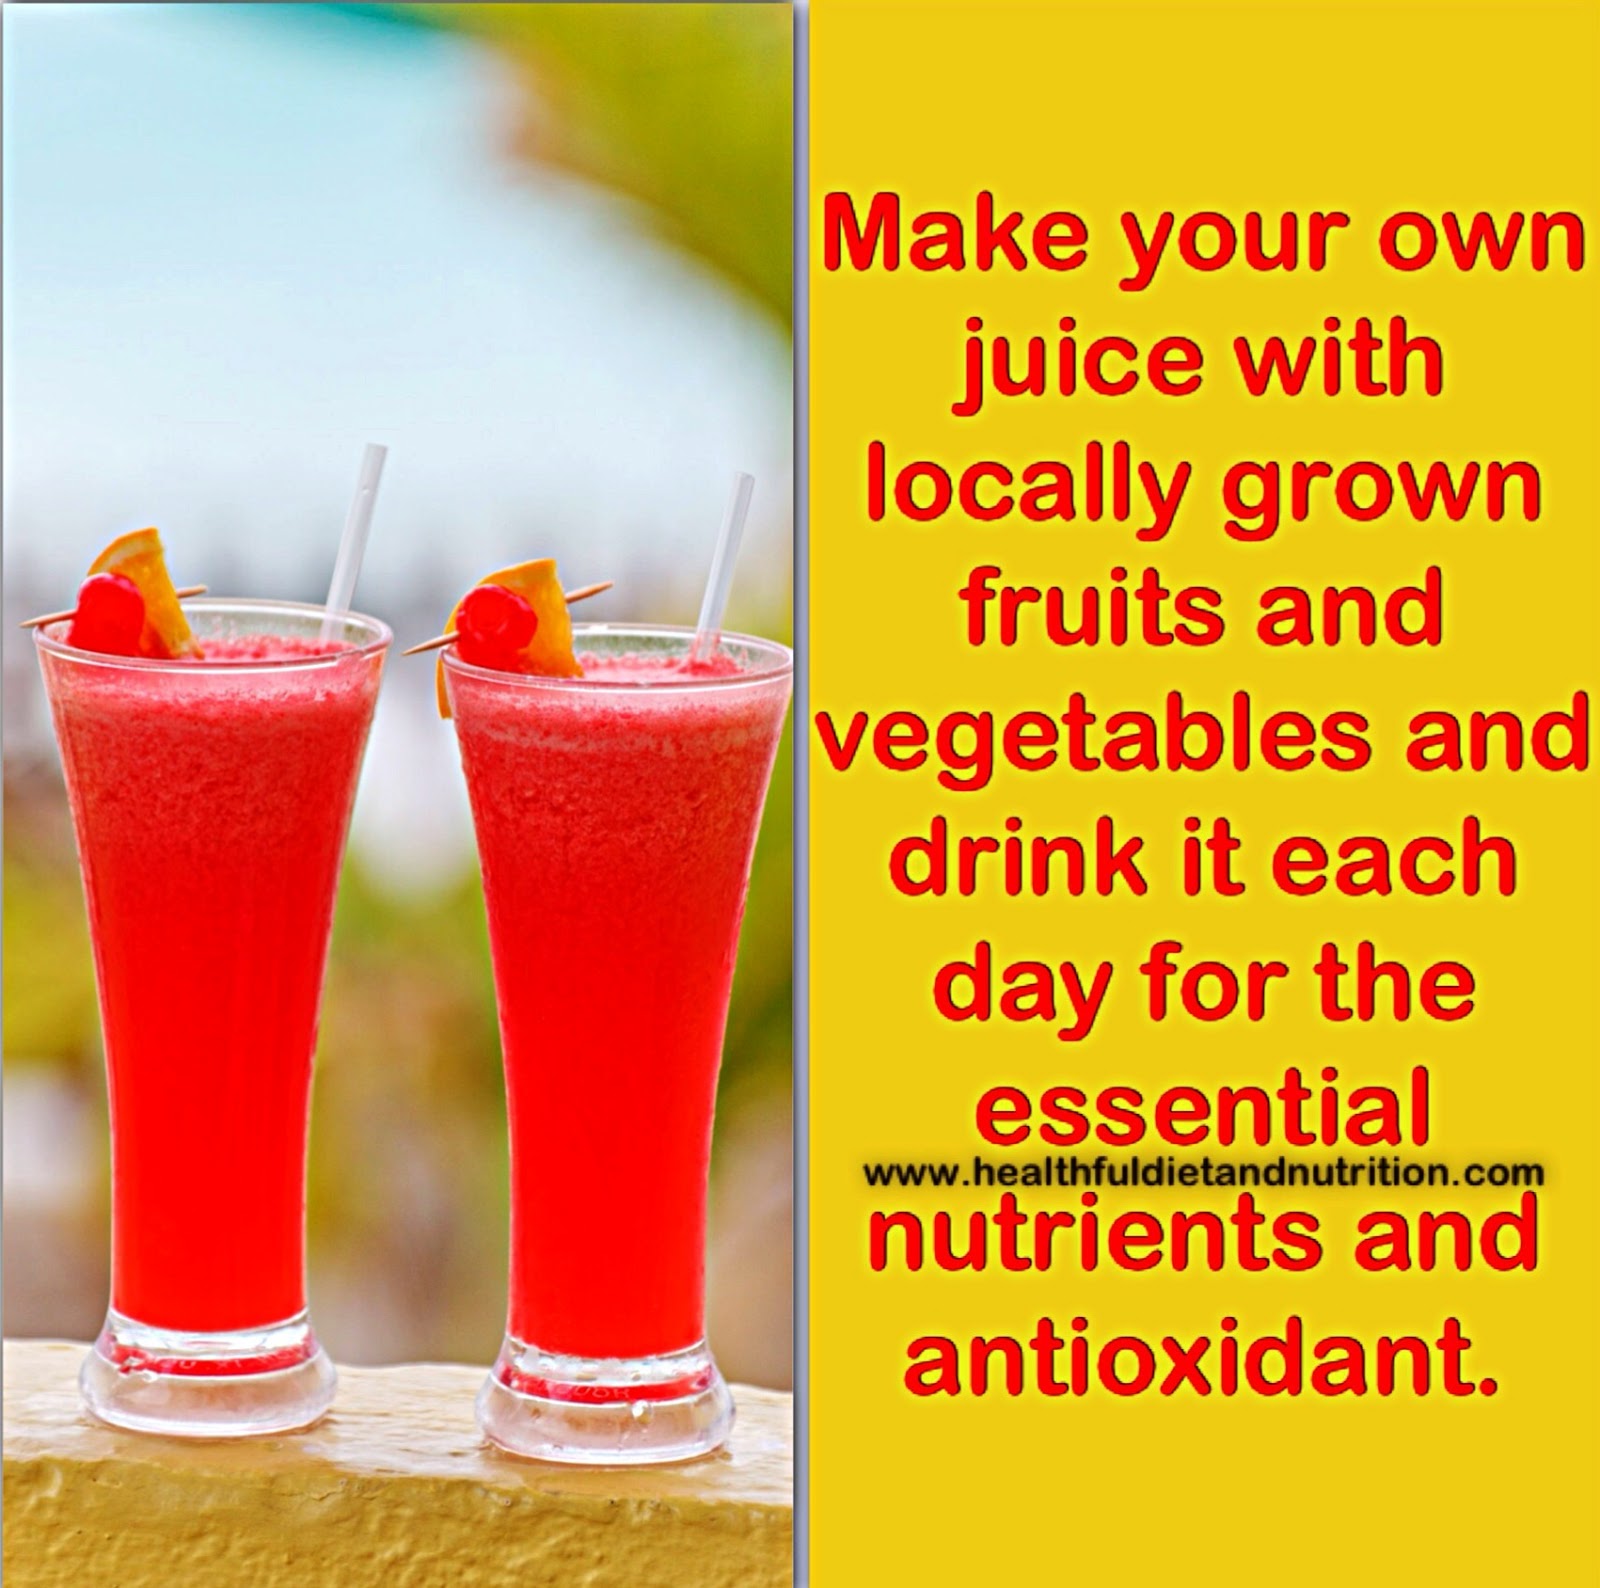 Make Your Own Juice For Essential Nutrients and Antioxidant